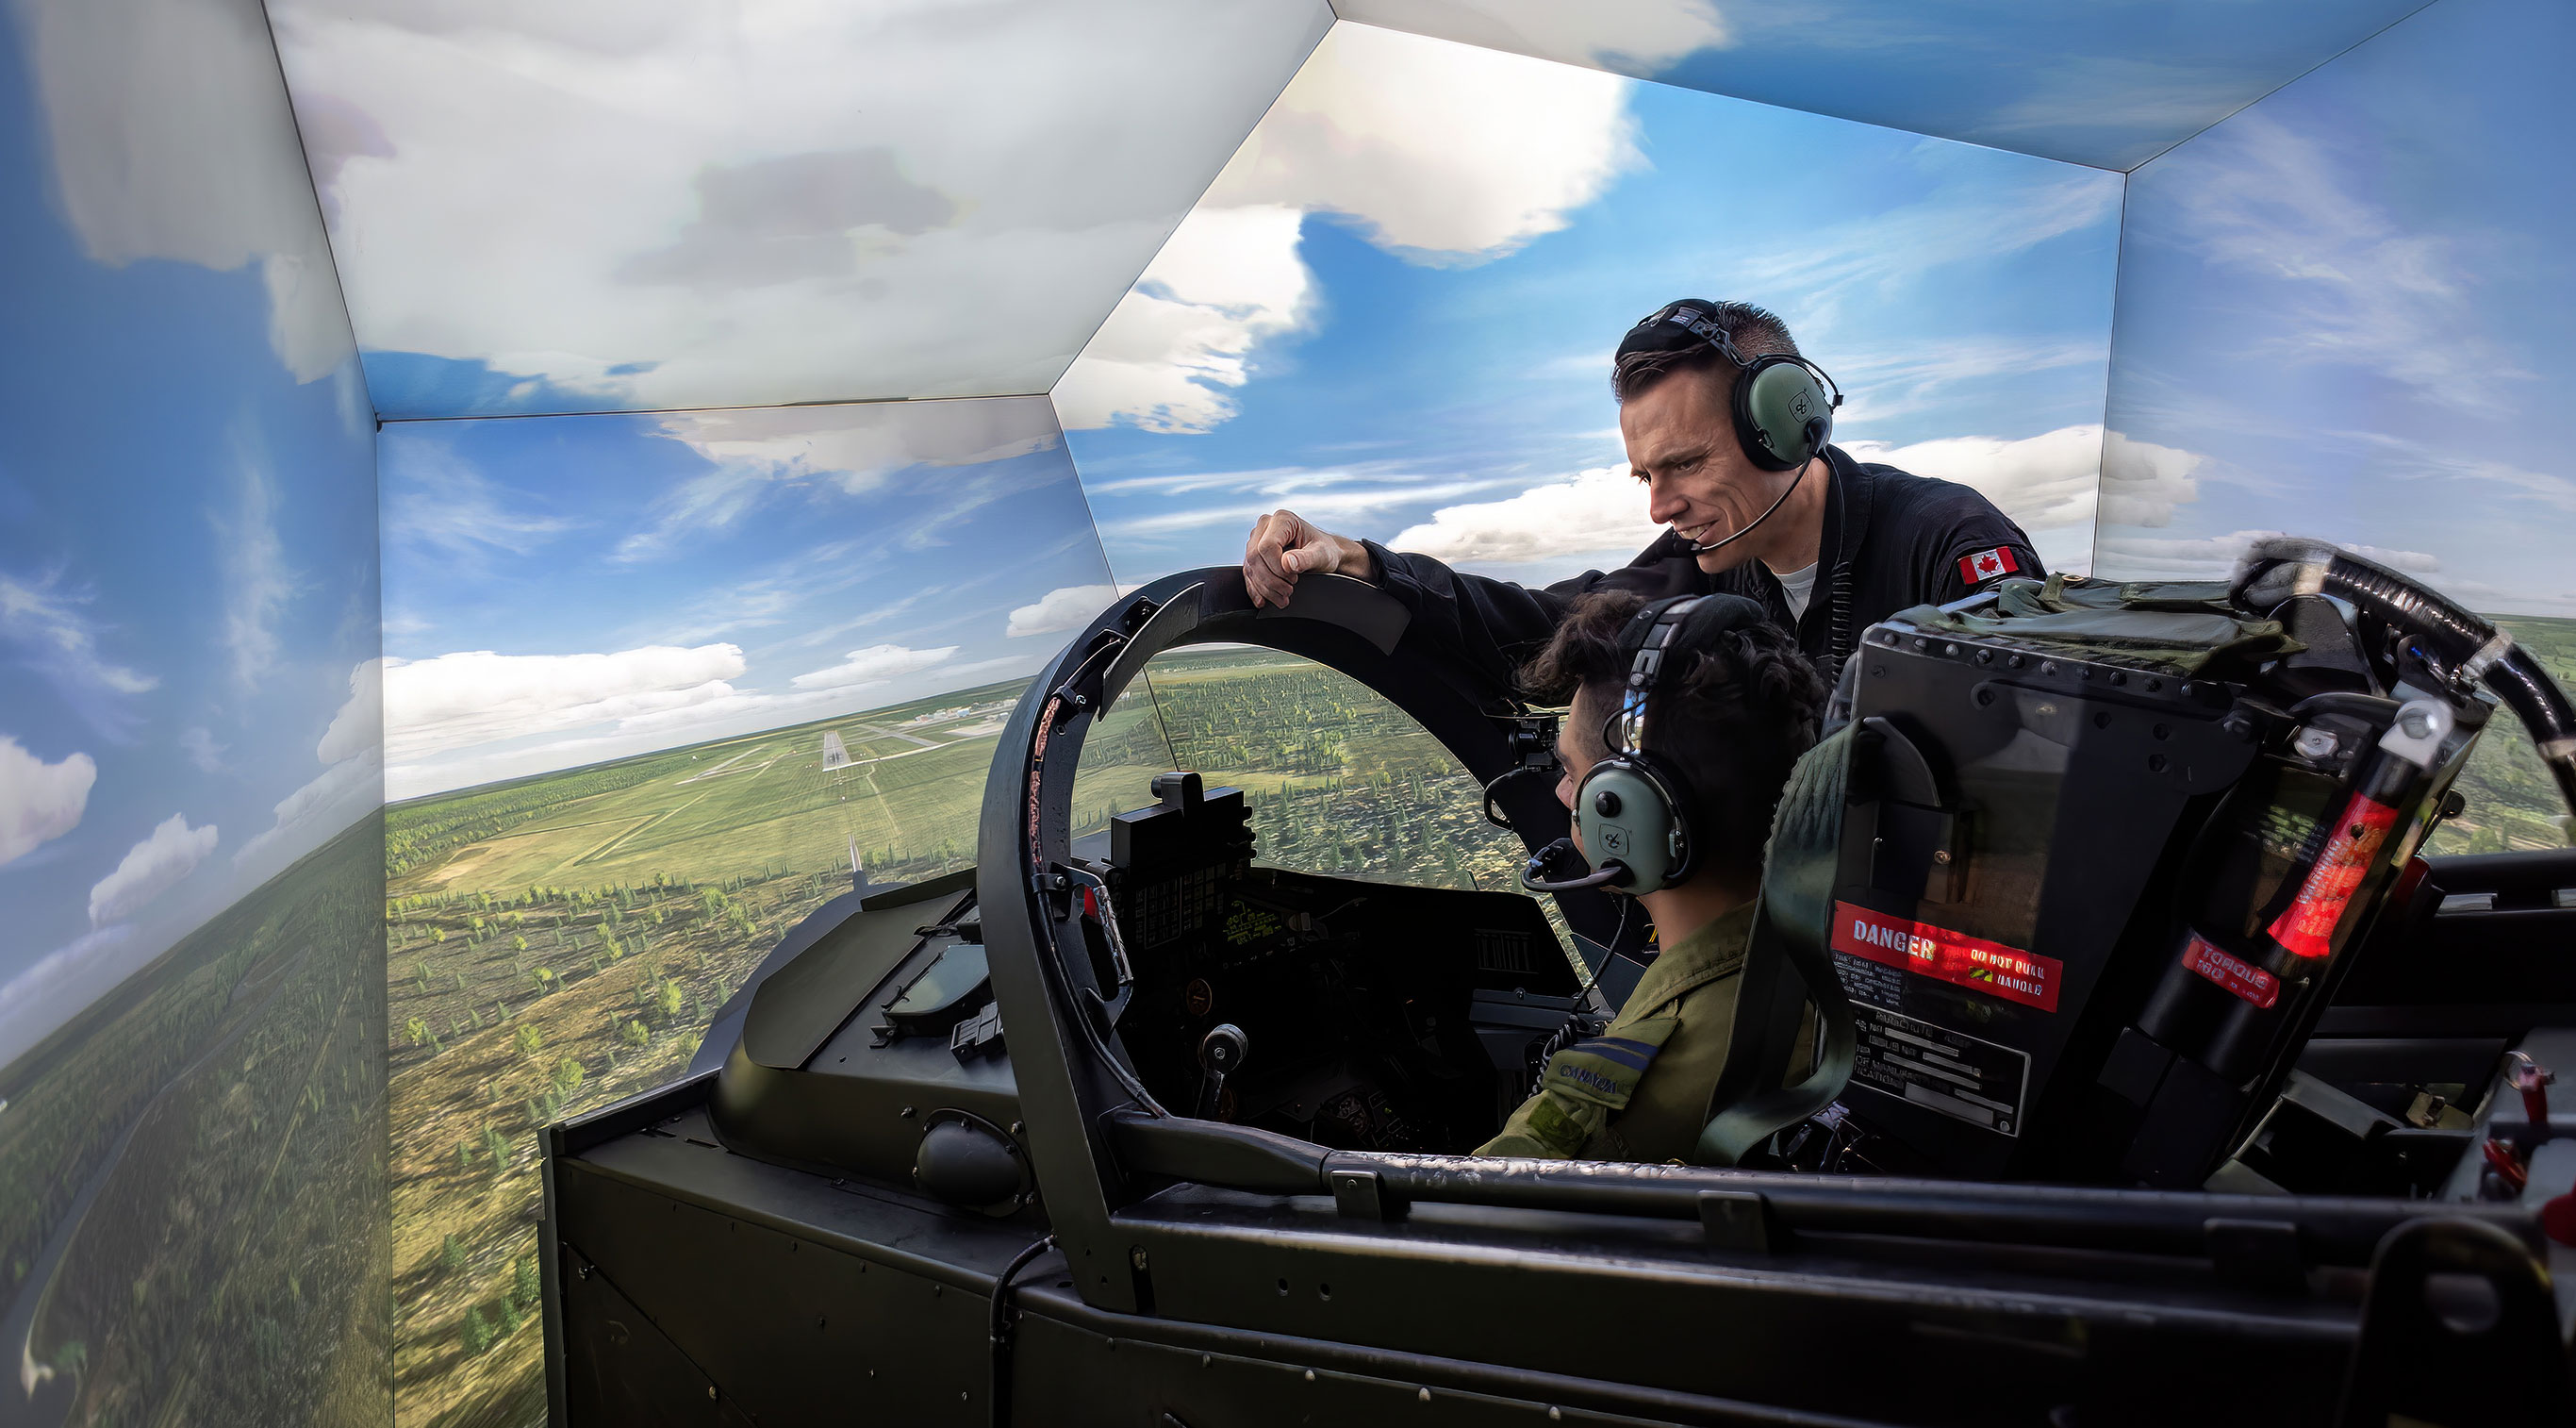 Header Image. Two men in the cockpit of a fighter simulator